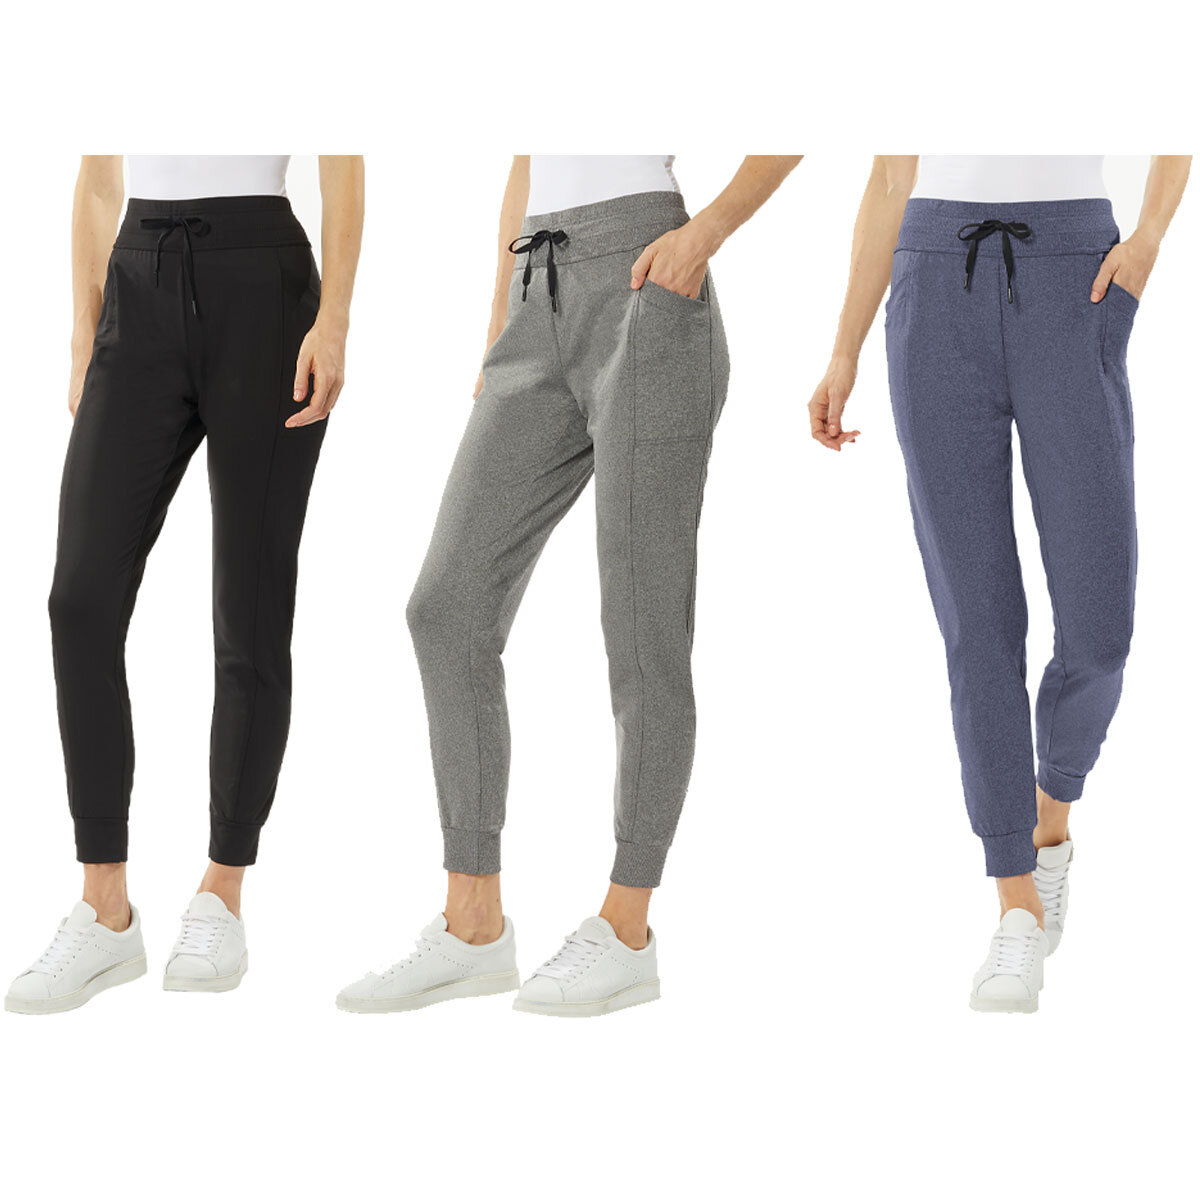 32 Degrees Ladies Pocket Jogger in 3 colours and 4 sizes